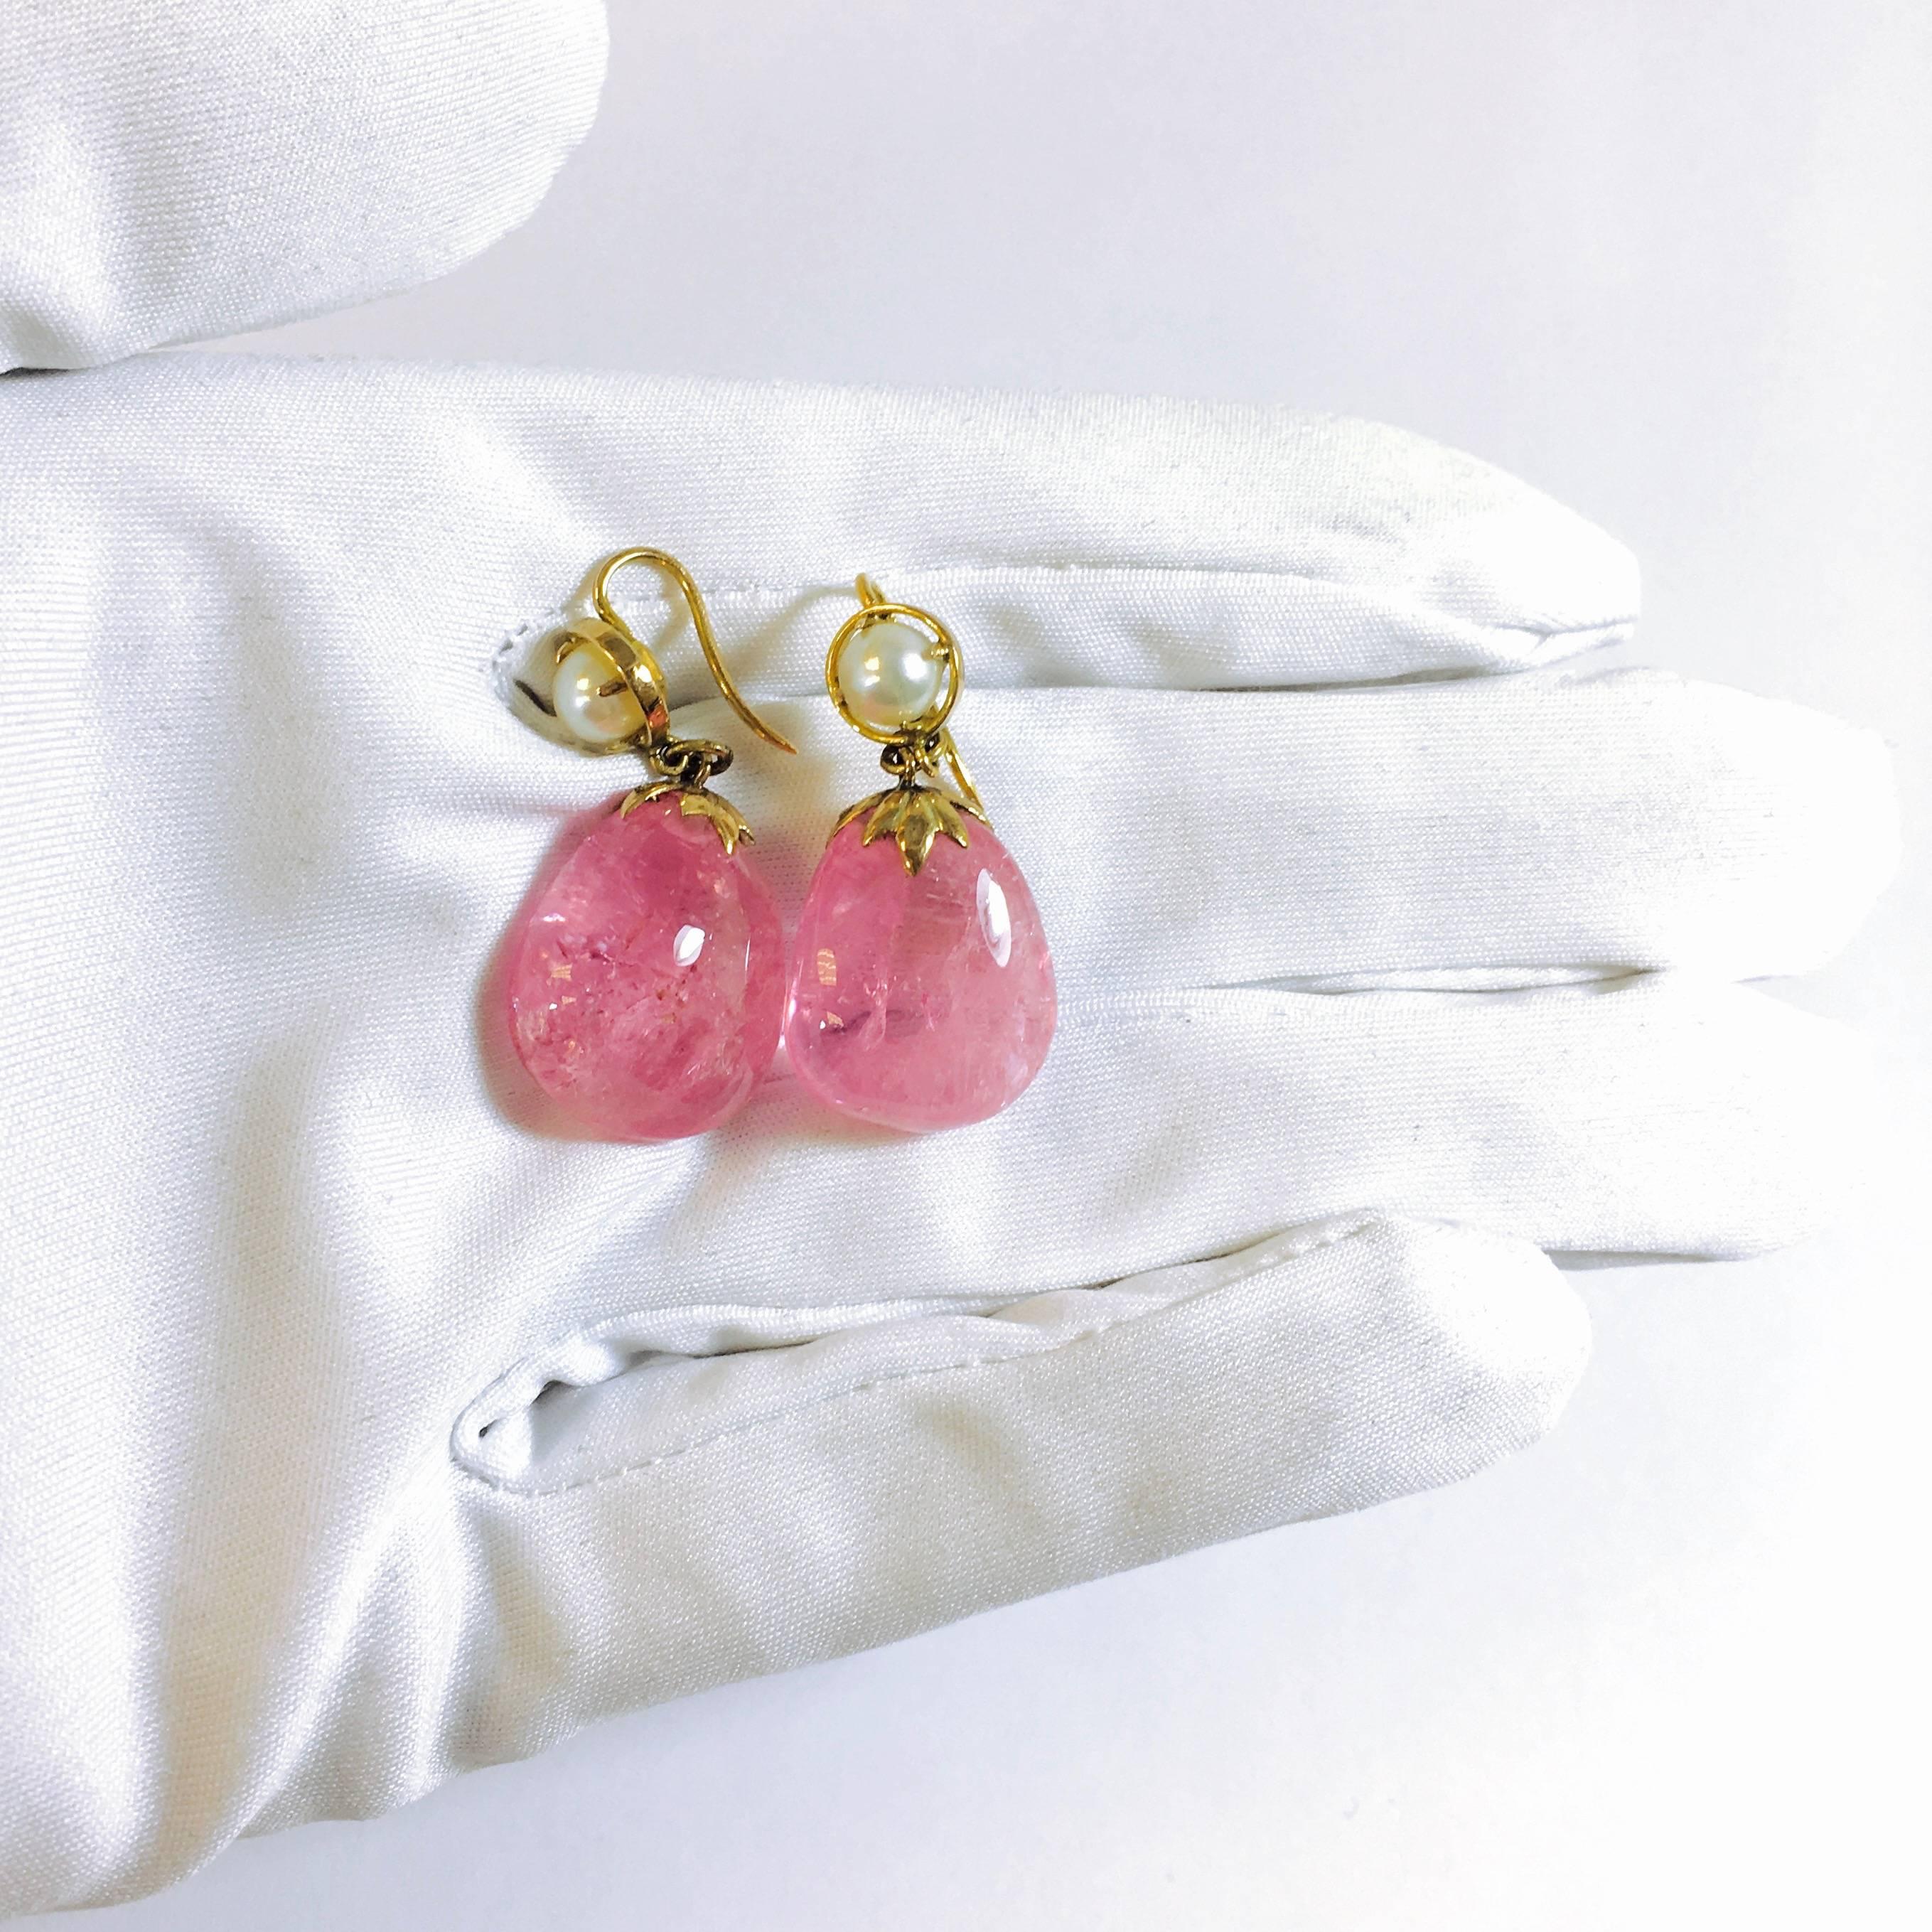 Gorgeous bubble gum pink free form chinese pink tourmaline earrings. Each earring is composed of an approximately 18 x 15 x 10mm unfaceted, polished pink tourmaline supported by a 14K yellow gold foliate cap, a 5.5 mm cultured pearl and a shepard